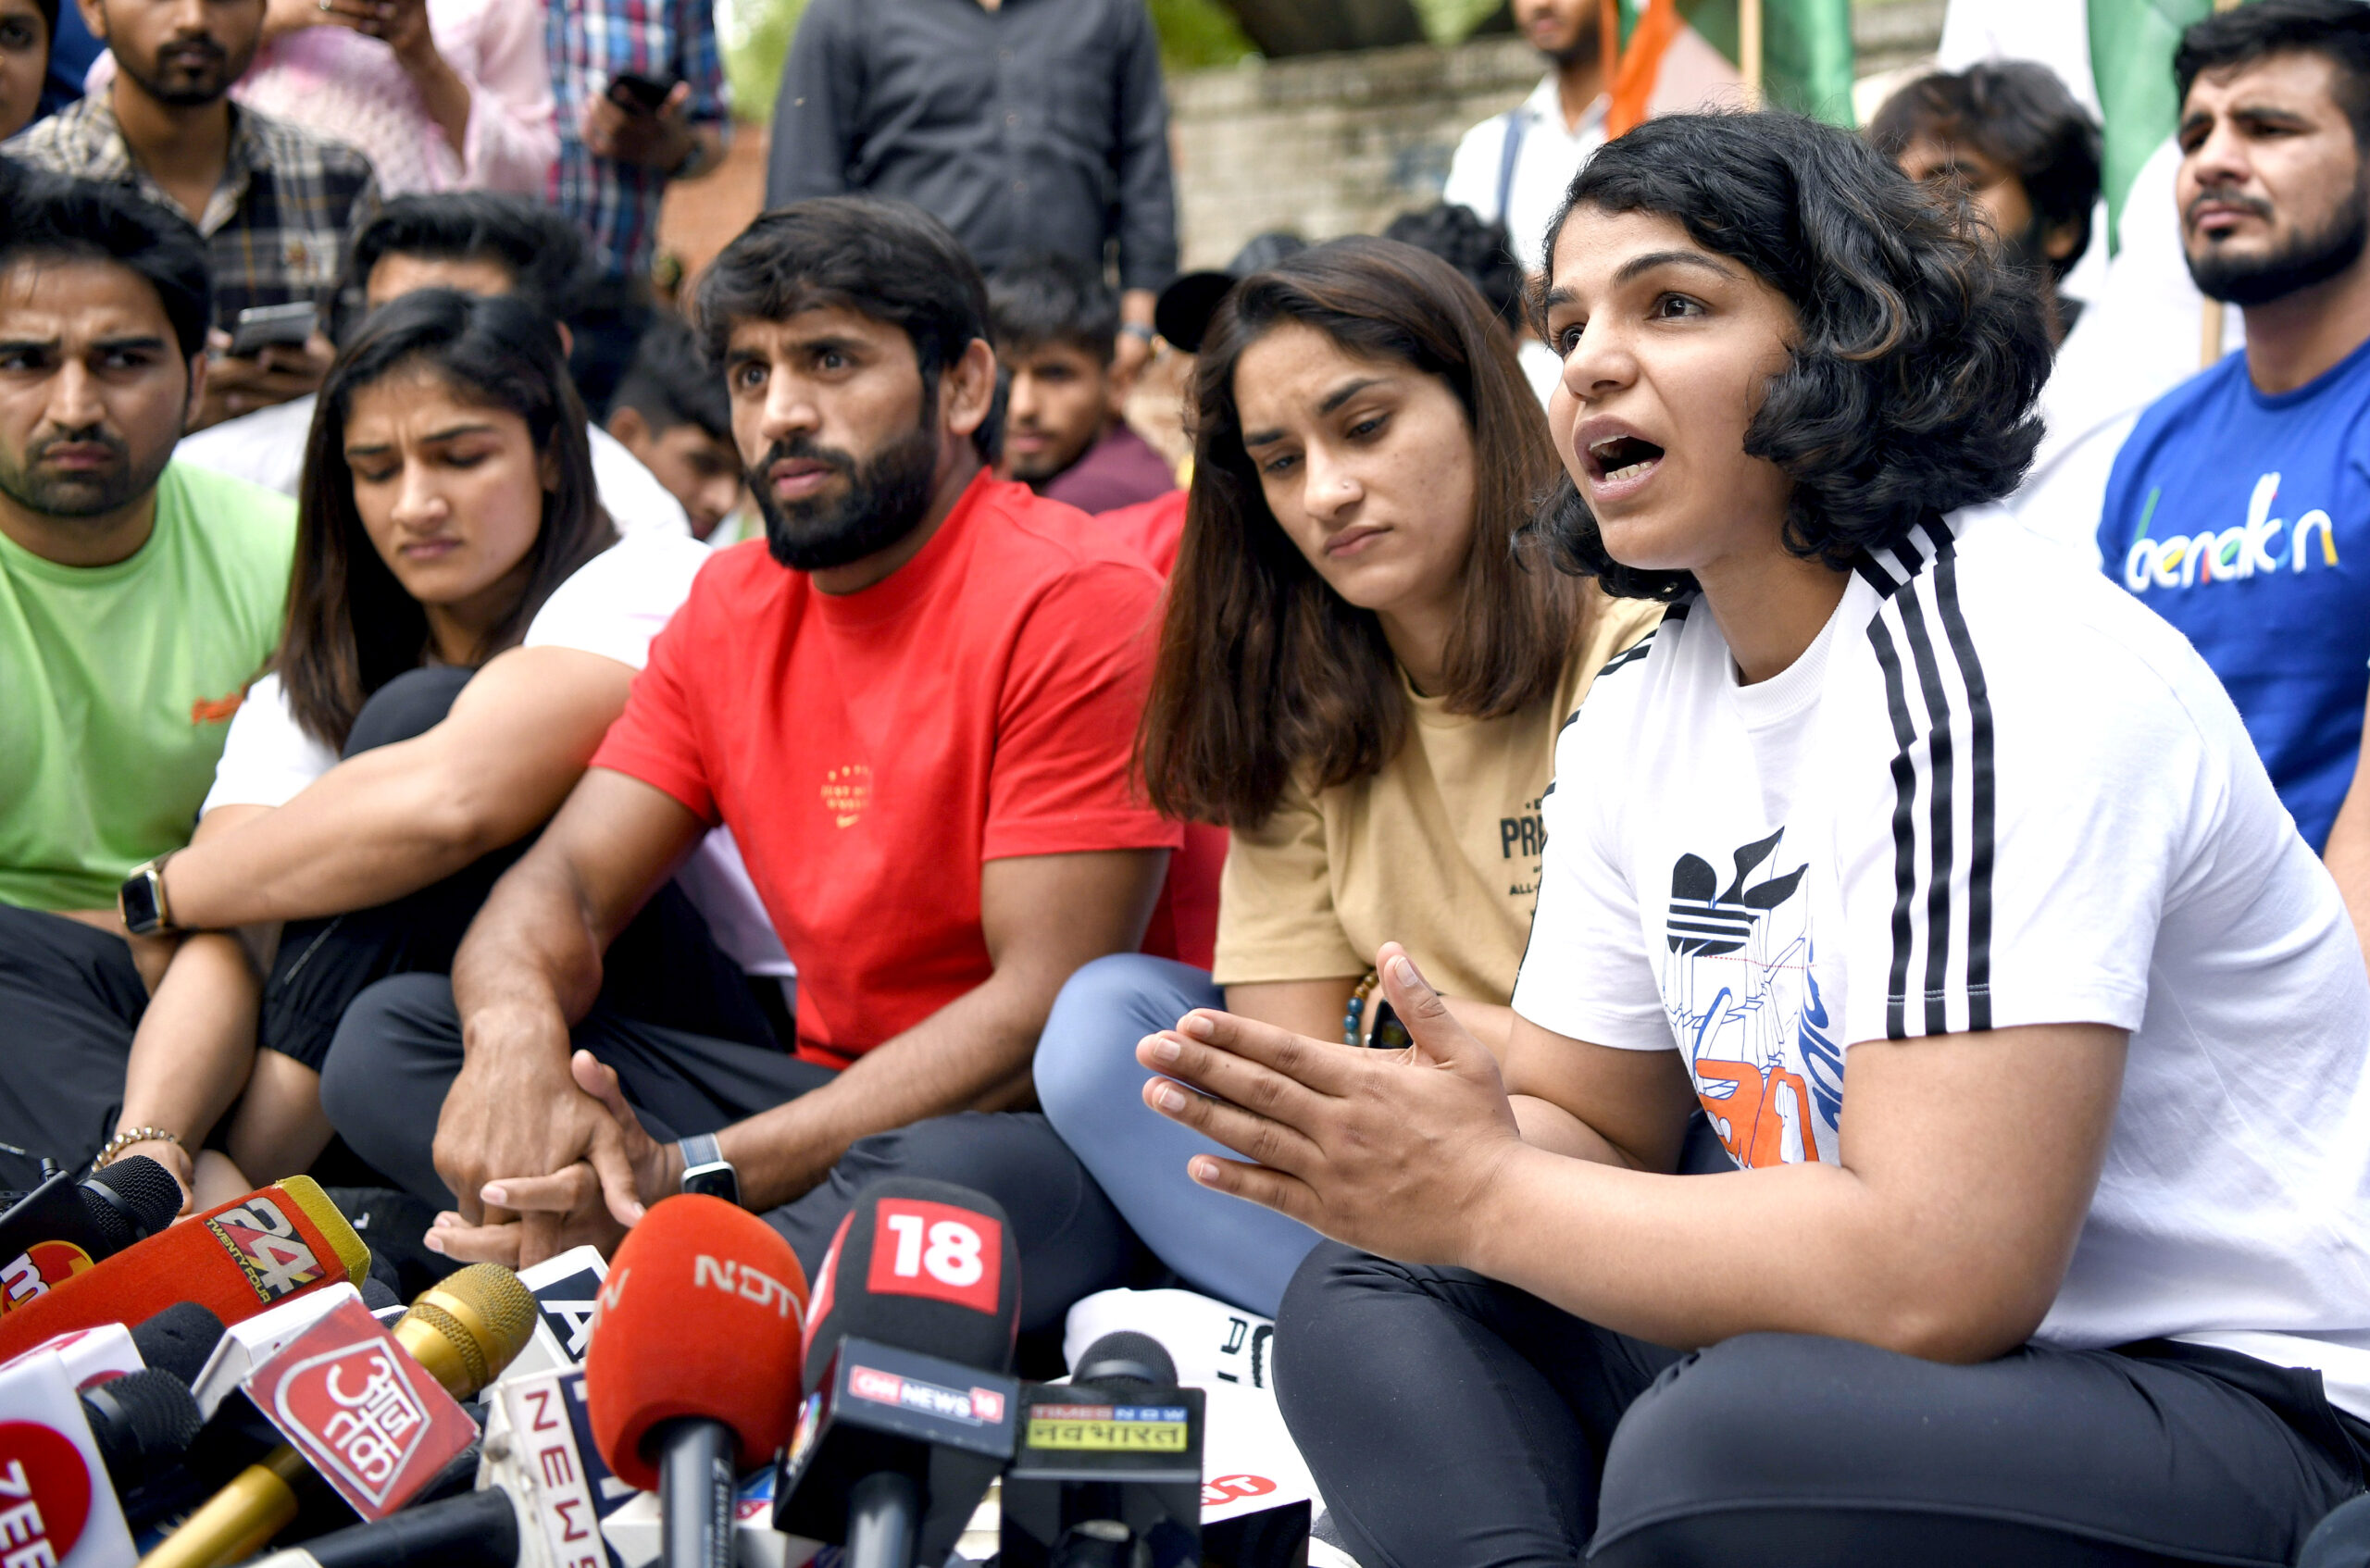 They forcefully dragged us inside bus: Olympic medalist Sakshi Malik